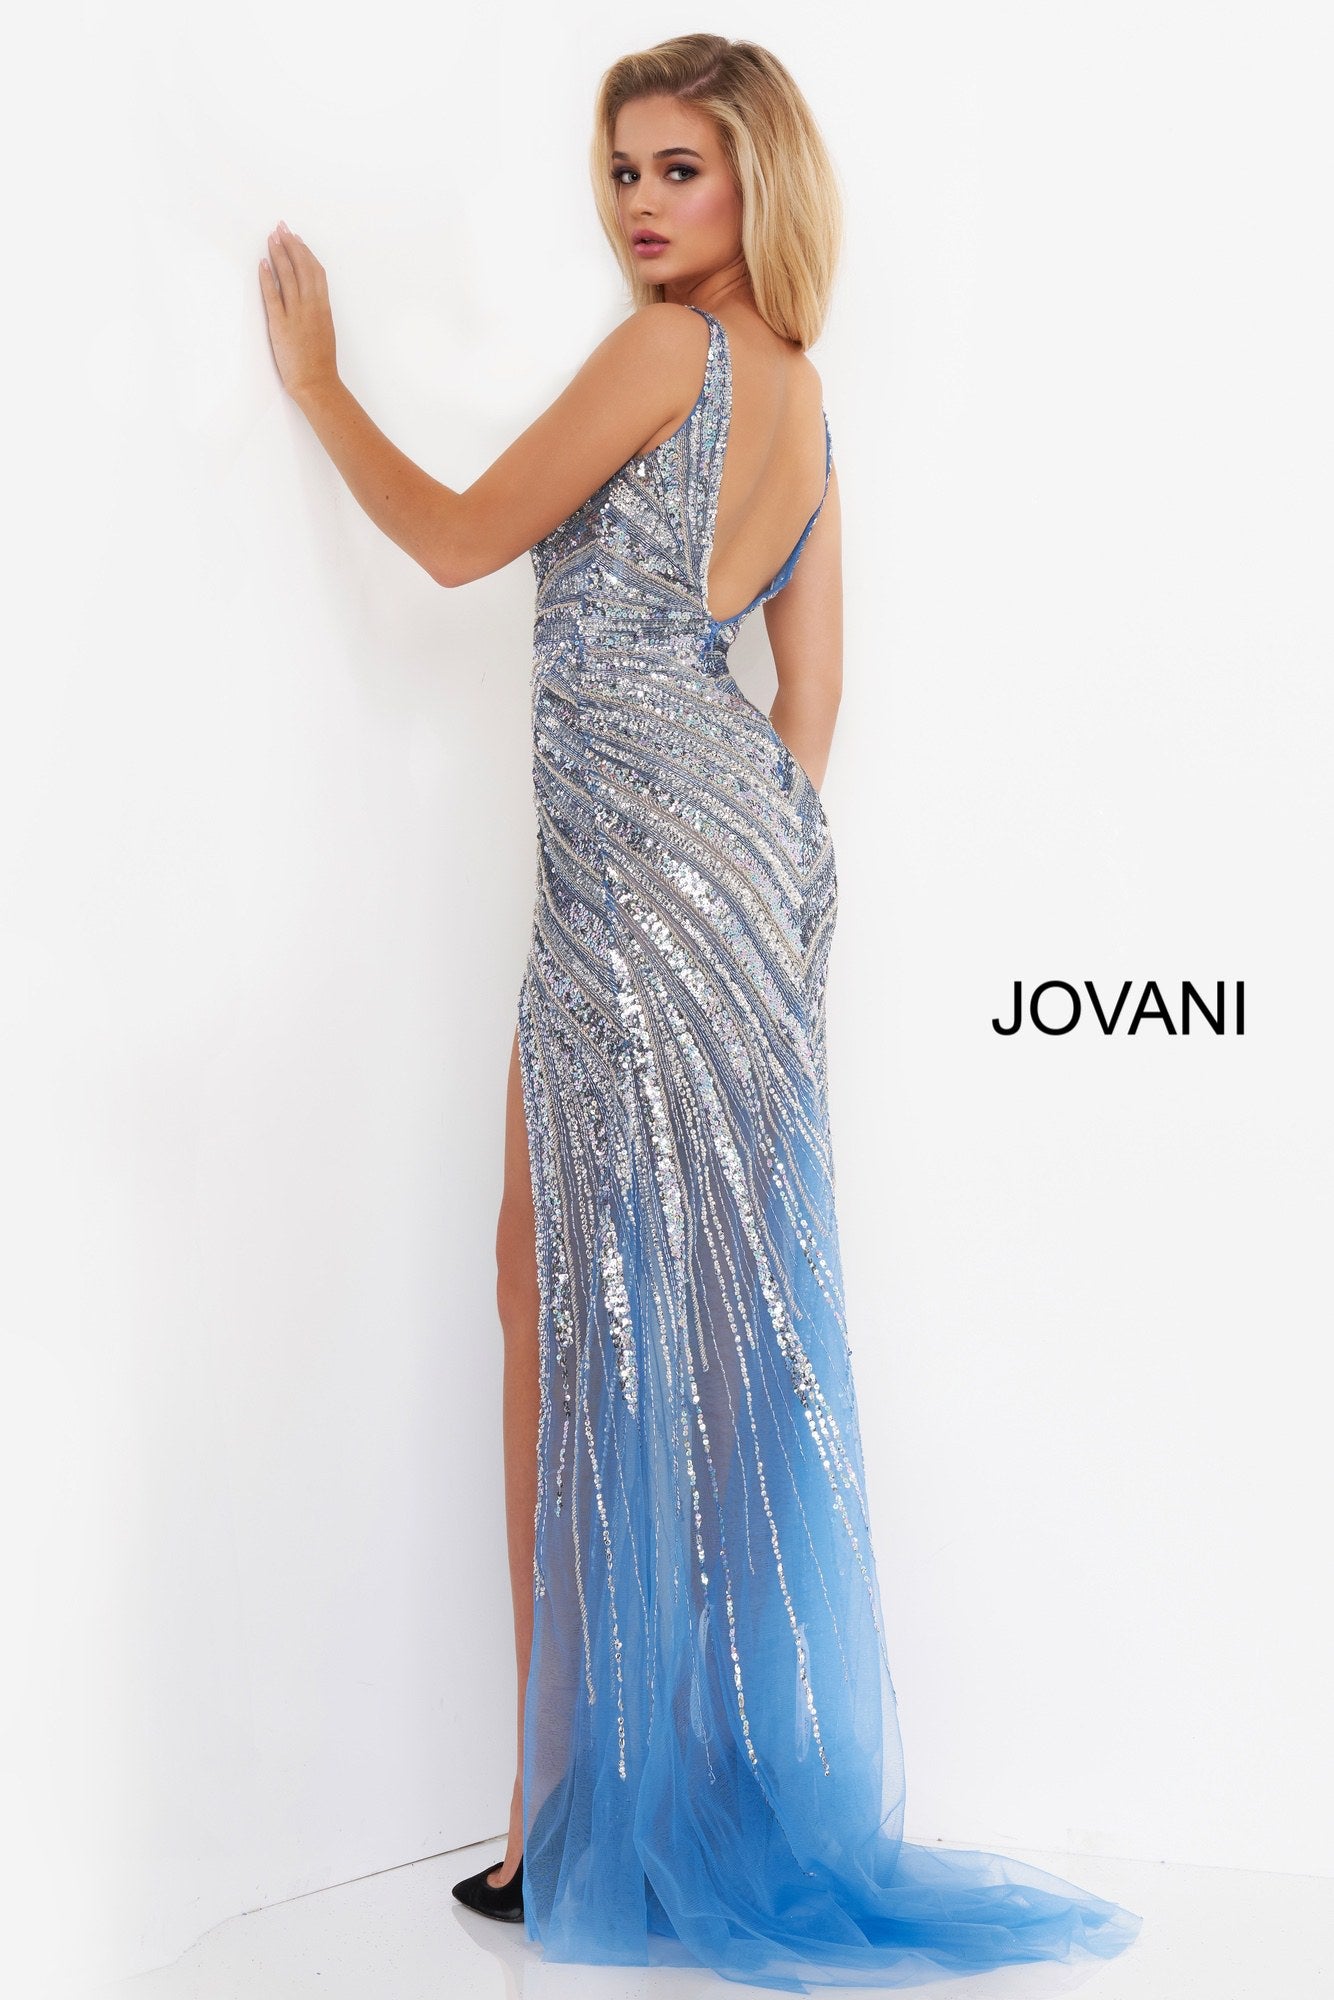 Jovani 3686 is a 2020 Prom Dress, Evening Gown, Pageant Dress & Formal Wear Attire. Featuring a Fully Crystal Embellished asymmetrical Bodice with detailed beading. Plunging V Neckline with high slit sheath silhouette with sheer mesh skirt.   Available Sizes: 00, 0, 2, 4, 6, 8, 10, 12, 14, 16, 18, 20, 22, 24  Available Colors: gold/silver, perriwinkle, platinum